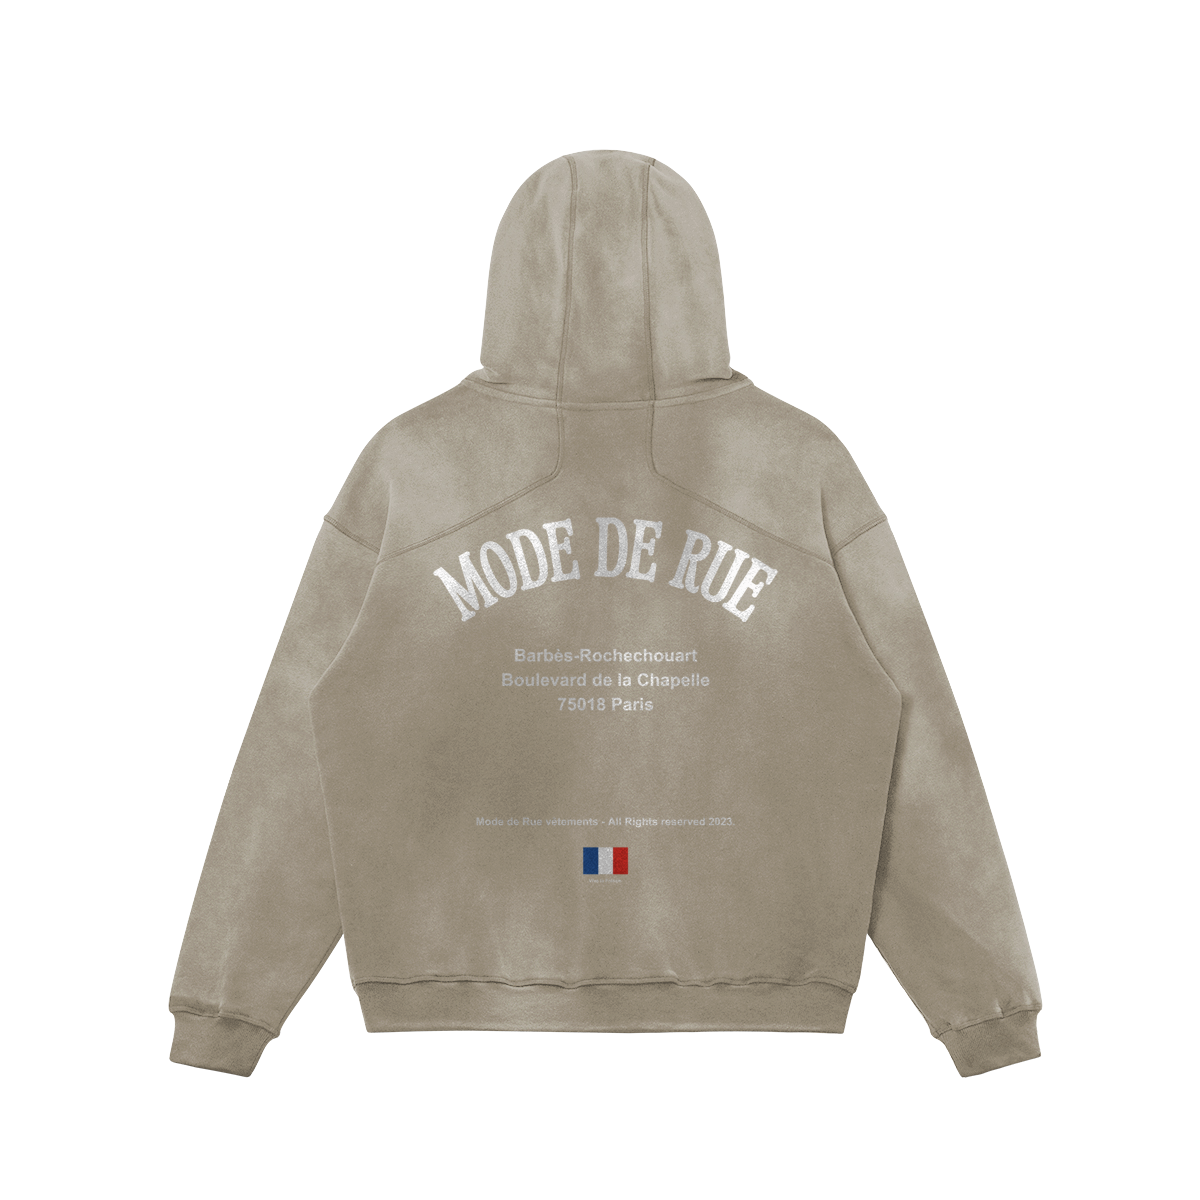 STRAIGHT OUTTA PARIS 400 HOODED